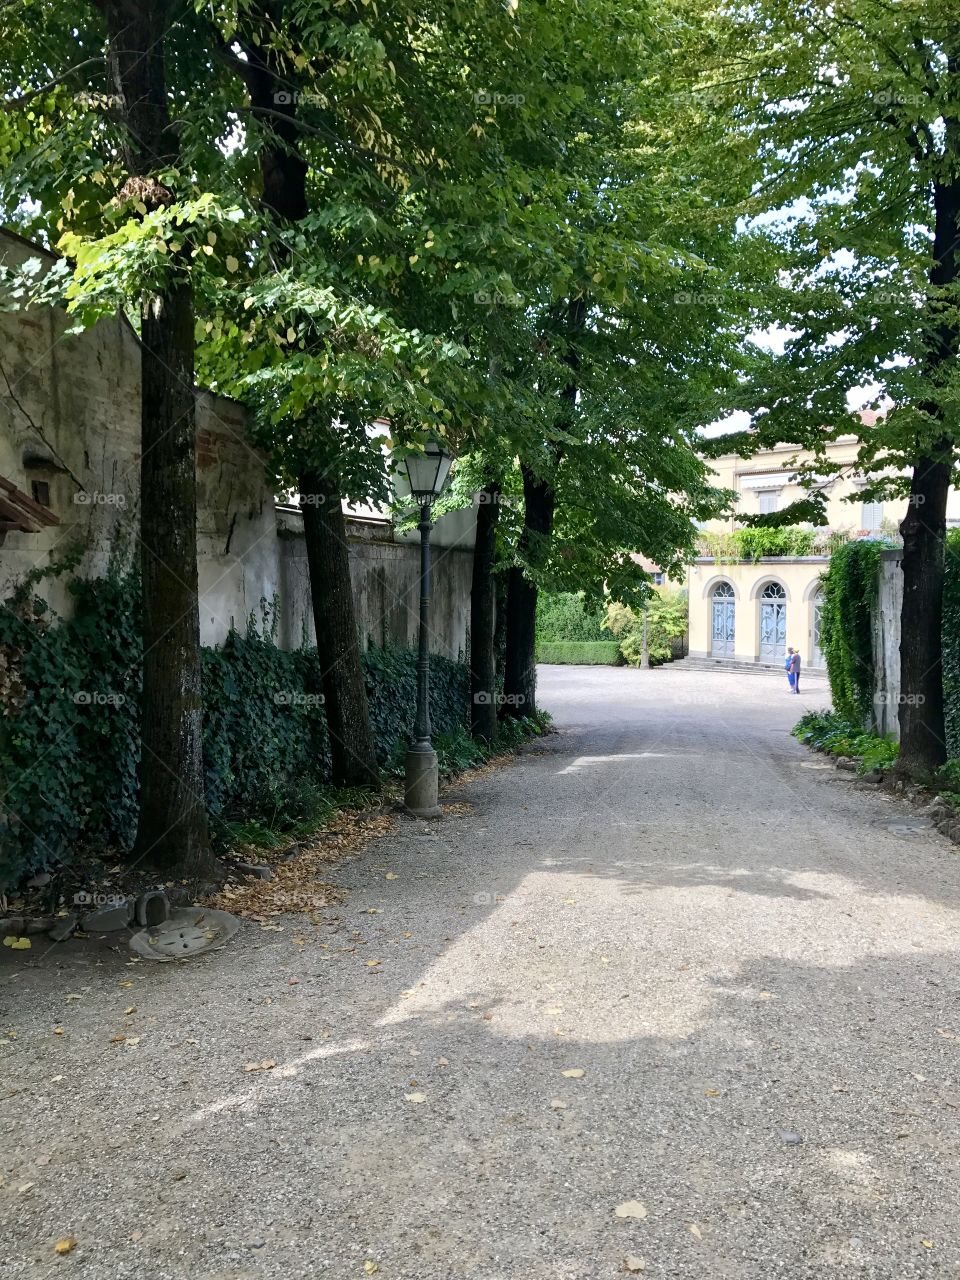 If you’re planning a trip to Florence, take a day out to see Pitti Palace. Serval world class museums and galleries, backed with a monument garden. Cool in the late Summer sun, every path reveals a magical glimpse of myths of the ages.